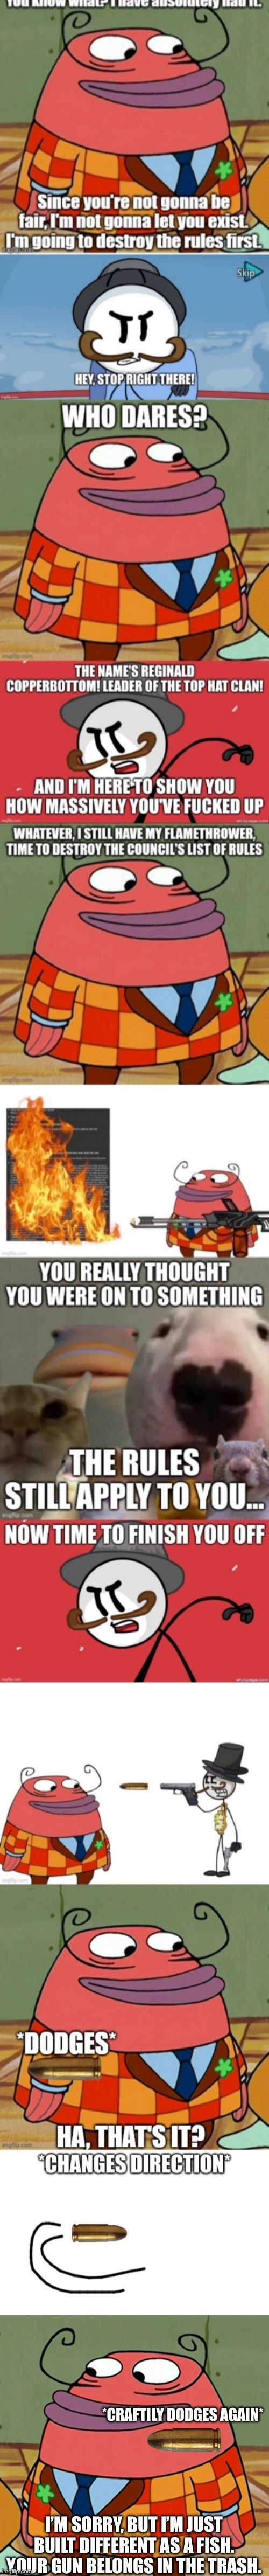 Fish have better reaction time than stickmen | *CRAFTILY DODGES AGAIN*; I’M SORRY, BUT I’M JUST BUILT DIFFERENT AS A FISH. YOUR GUN BELONGS IN THE TRASH. | image tagged in monty p moneybags | made w/ Imgflip meme maker